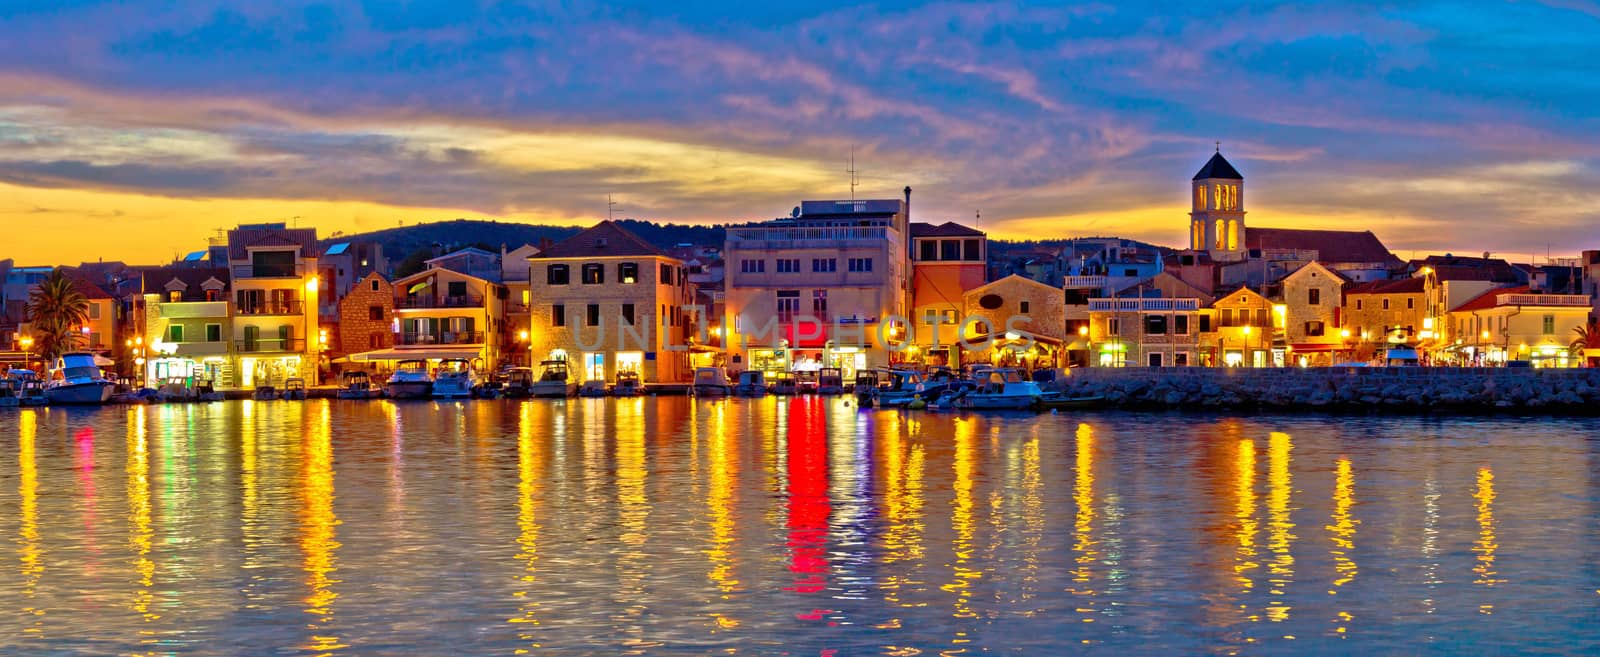 Colorful evening in Town of Vodice by xbrchx